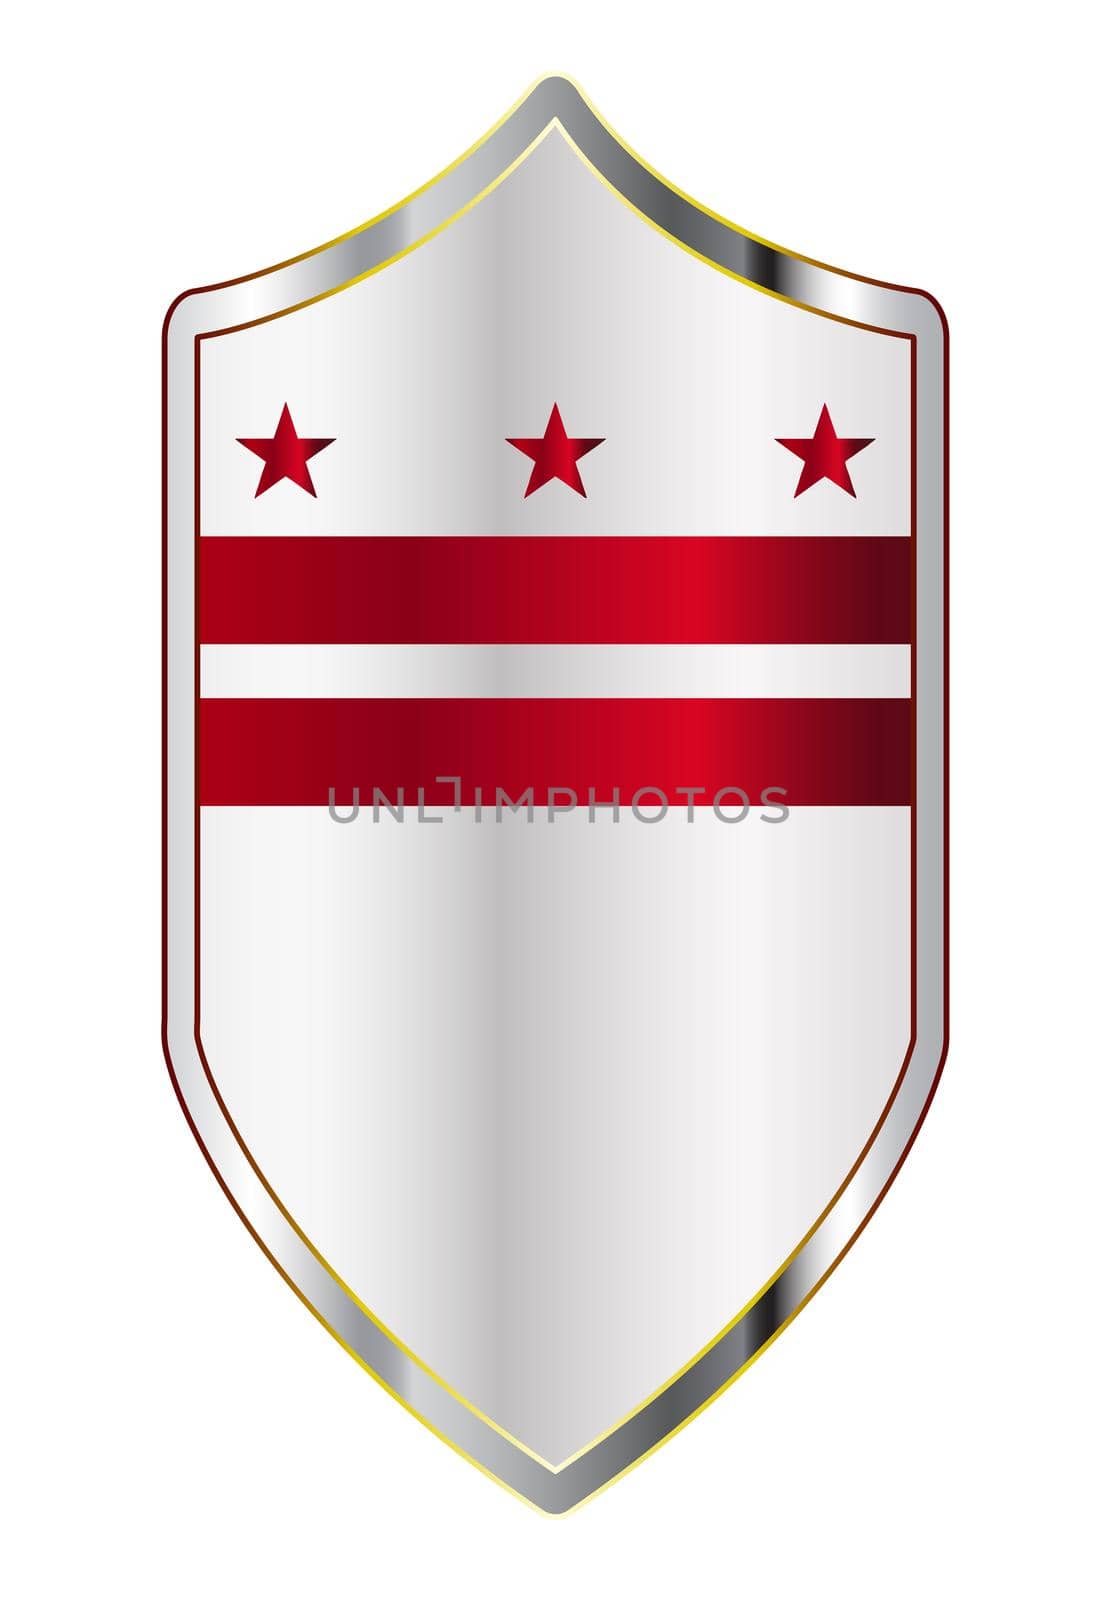 A typical crusader type shield with the state flag of Washington DC all isolated on a white background